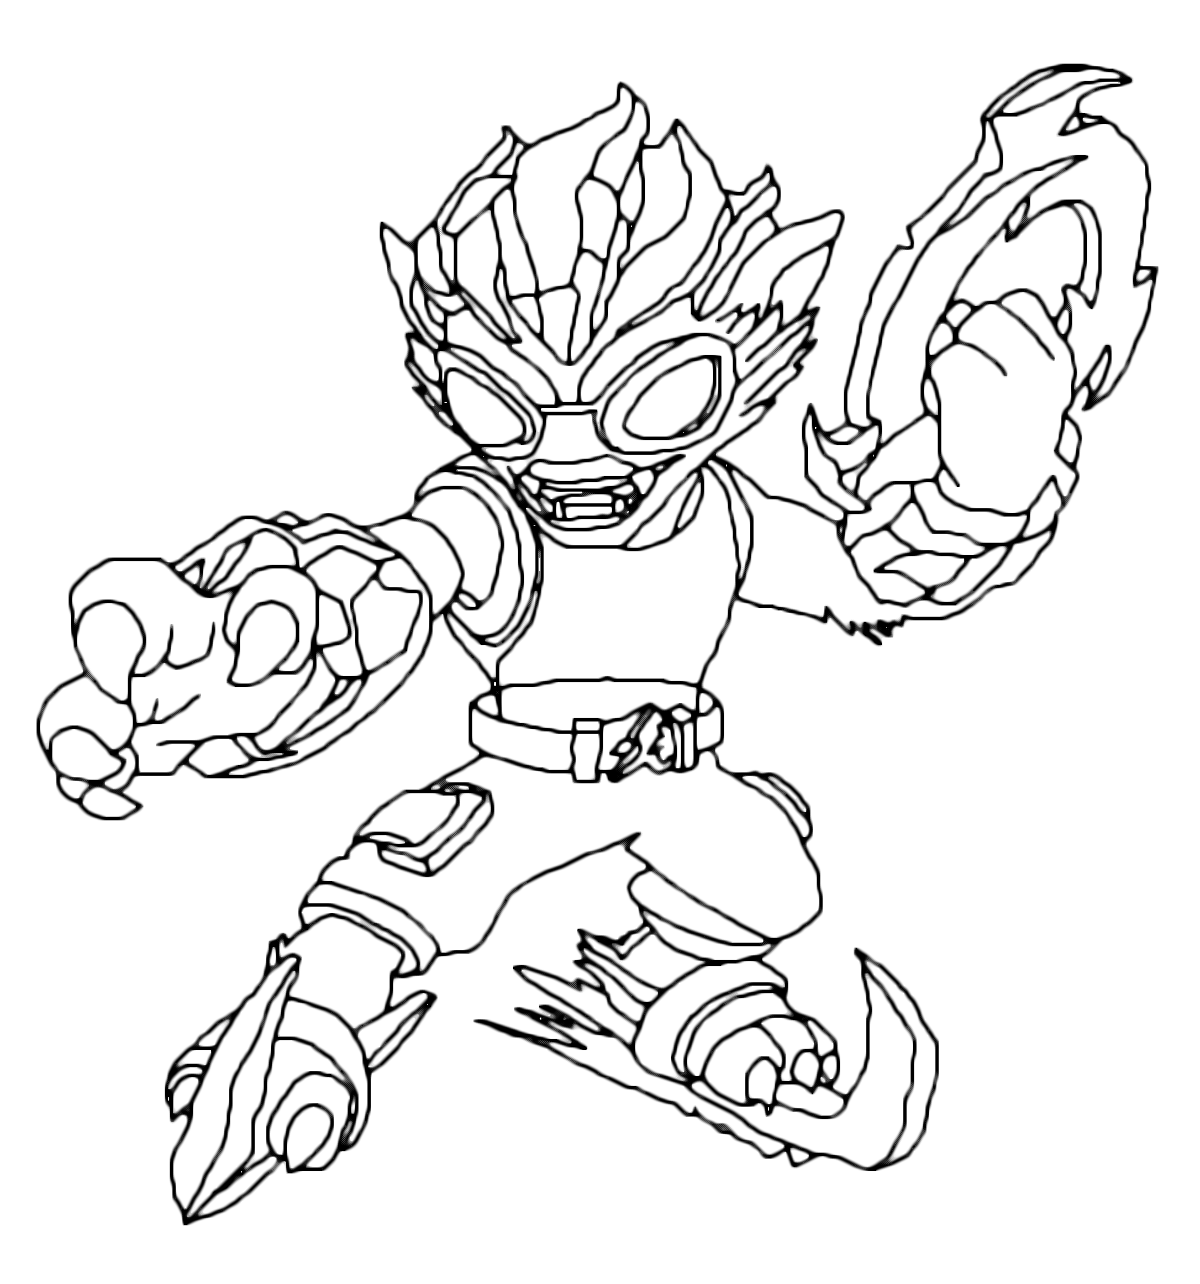 Freeze blade coloring pages